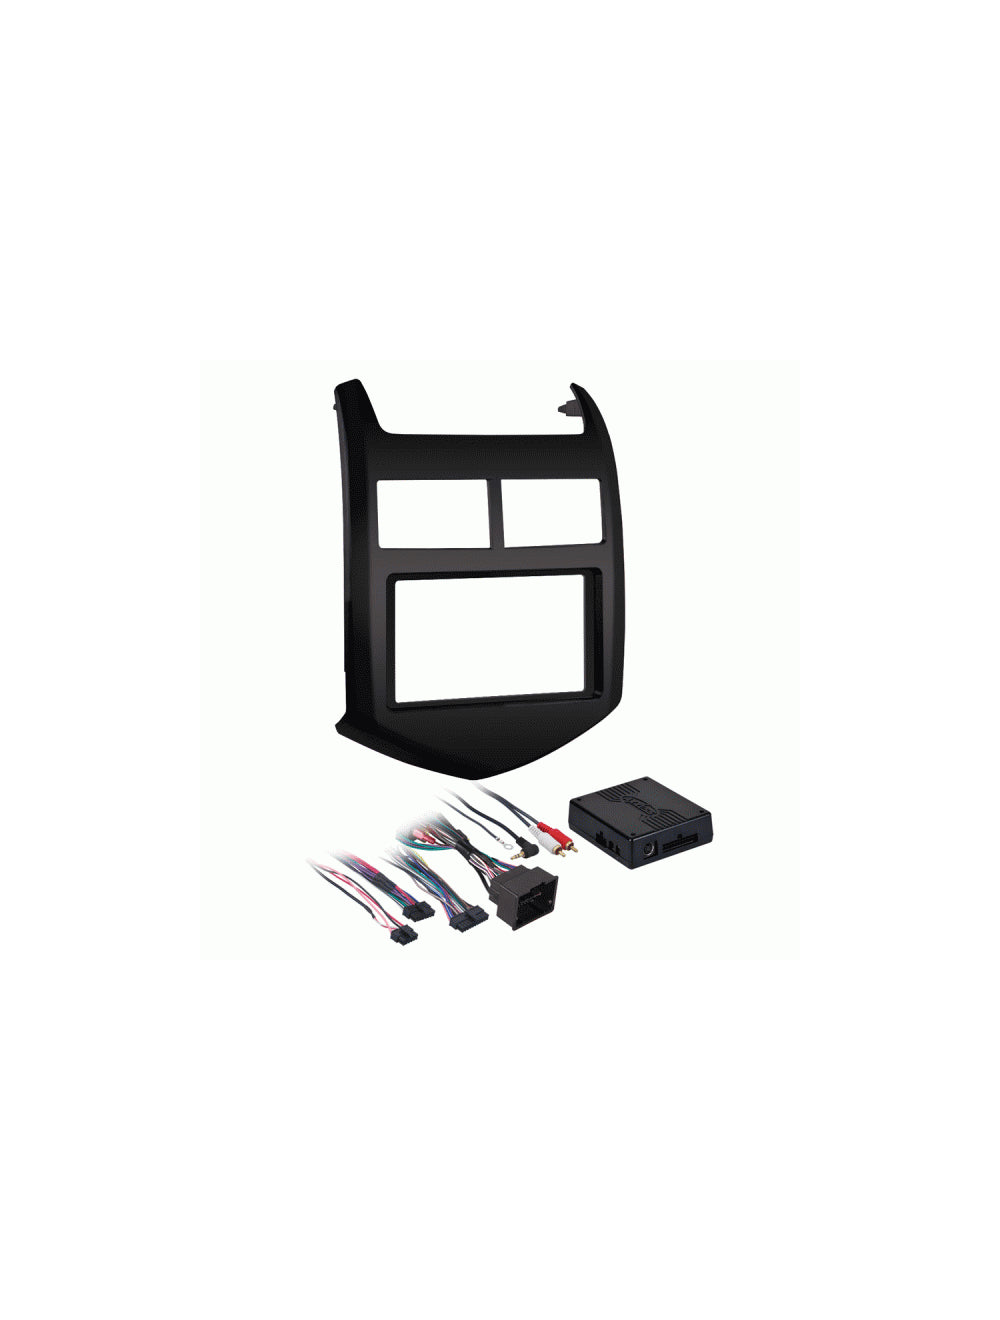 Metra 99-3012G Single and Double Din Installation Kit for 2012-2016 Chevy Sonic